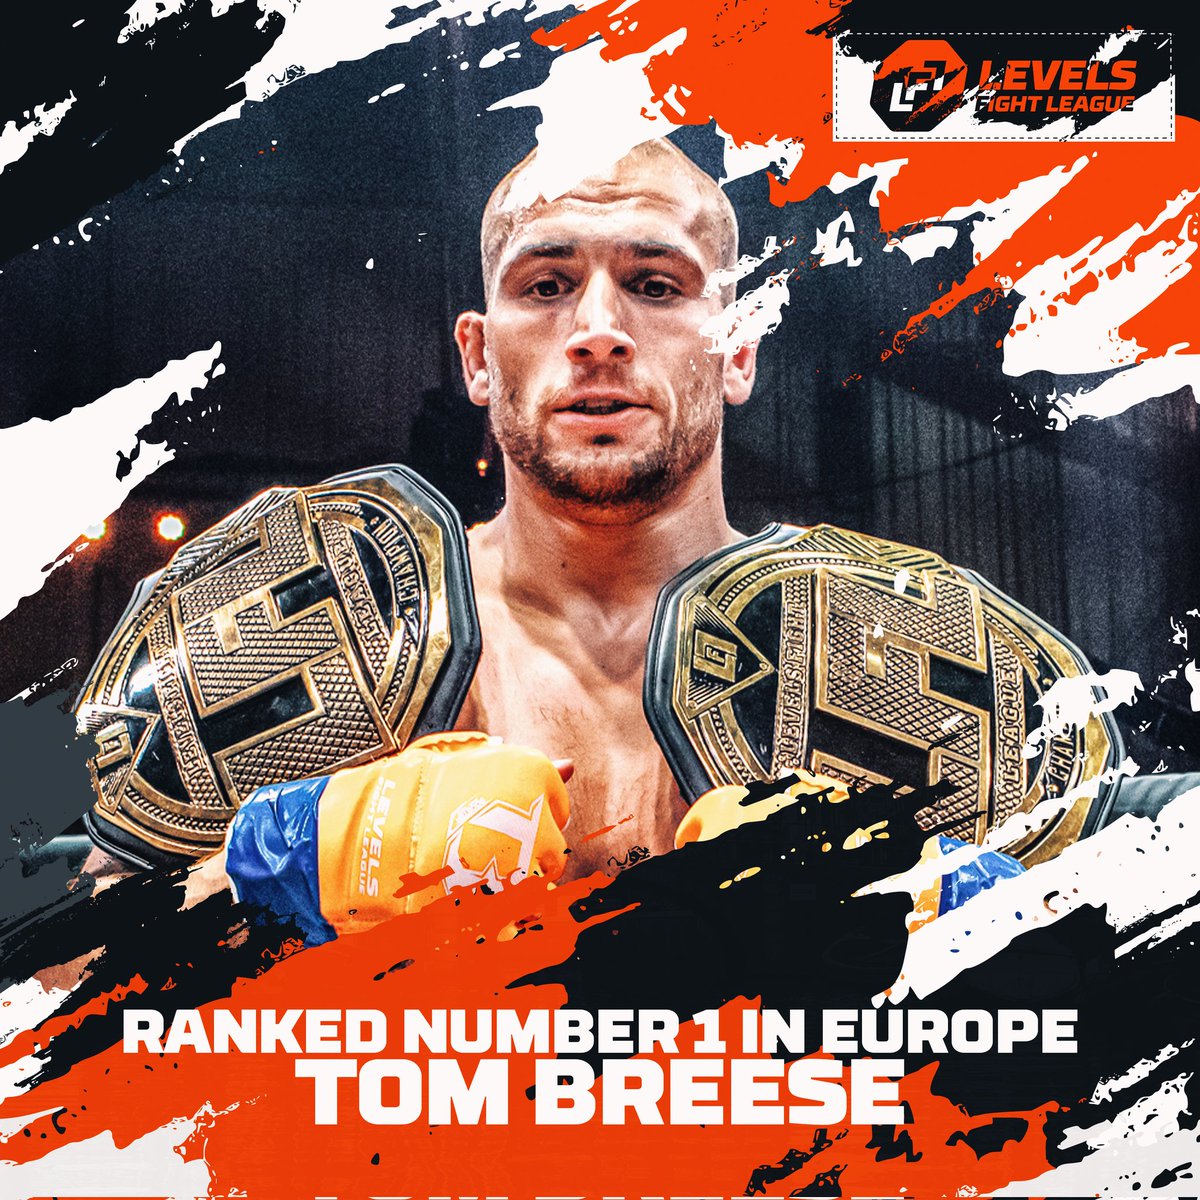 No.1 Ranked Light Heavyweight in Europe!

After his dominant display at LFL 9, 𝗧𝗼𝗺 𝗕𝗿𝗲𝗲𝘀𝗲 becomes the top ranked LHW in Western Europe, as he secures the LHW Title.

#LFL9 | July 9th | Amsterdam 

#LFLMMA #LevelsFightLeague #DutchMMA #LightHeavyweight #Champion